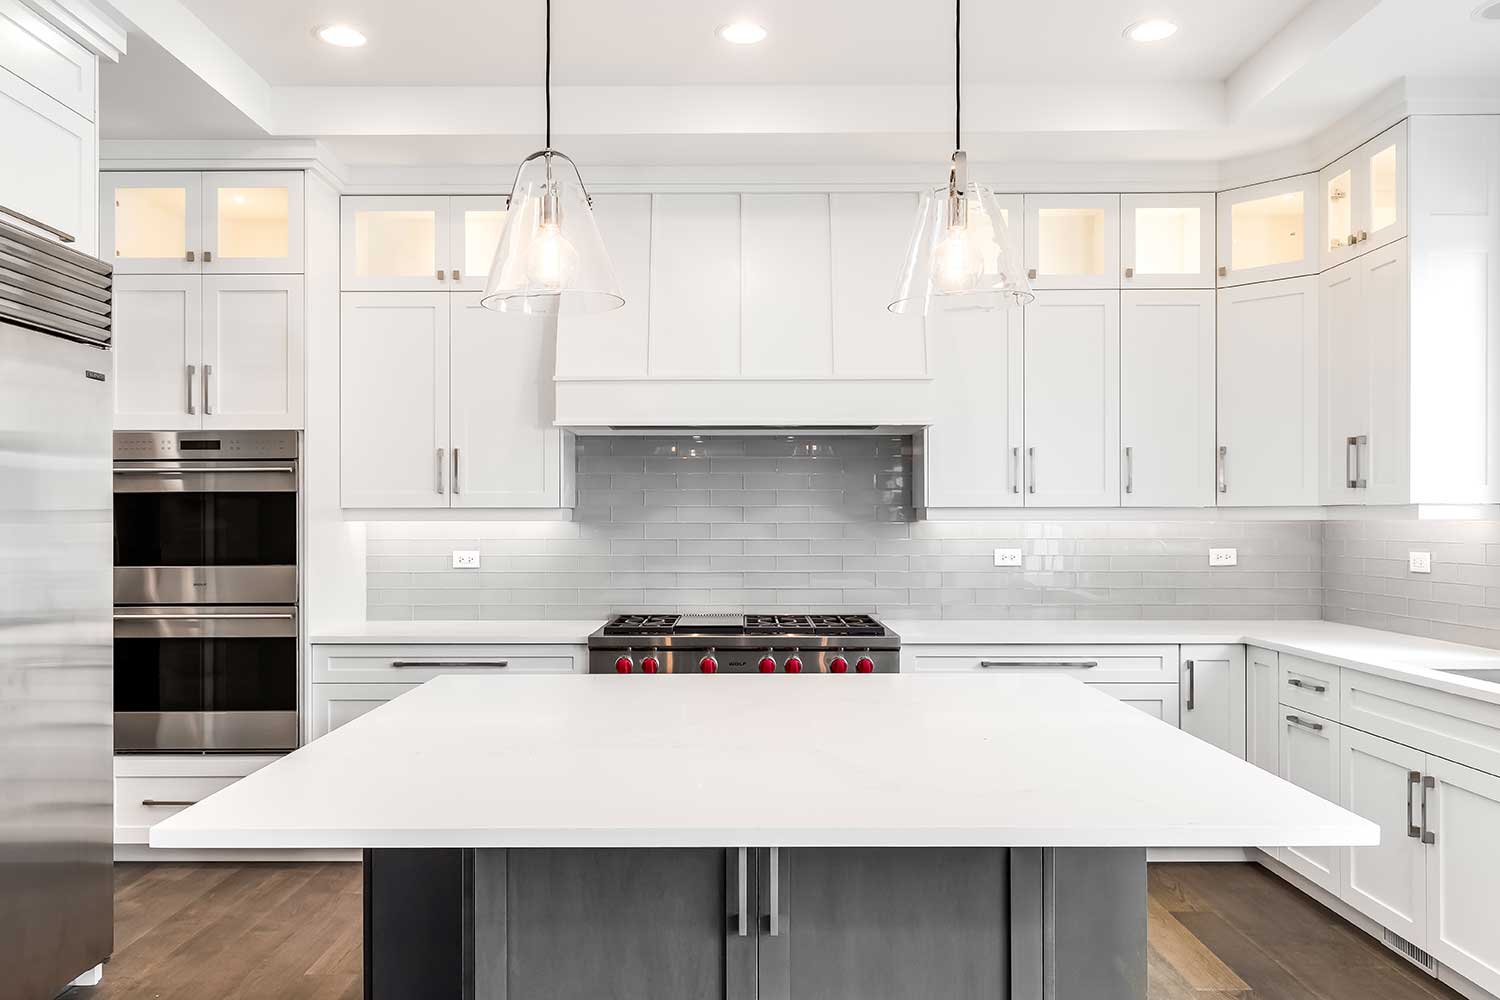 Kitchen cabinets with white countertop black handles and tile backsplash